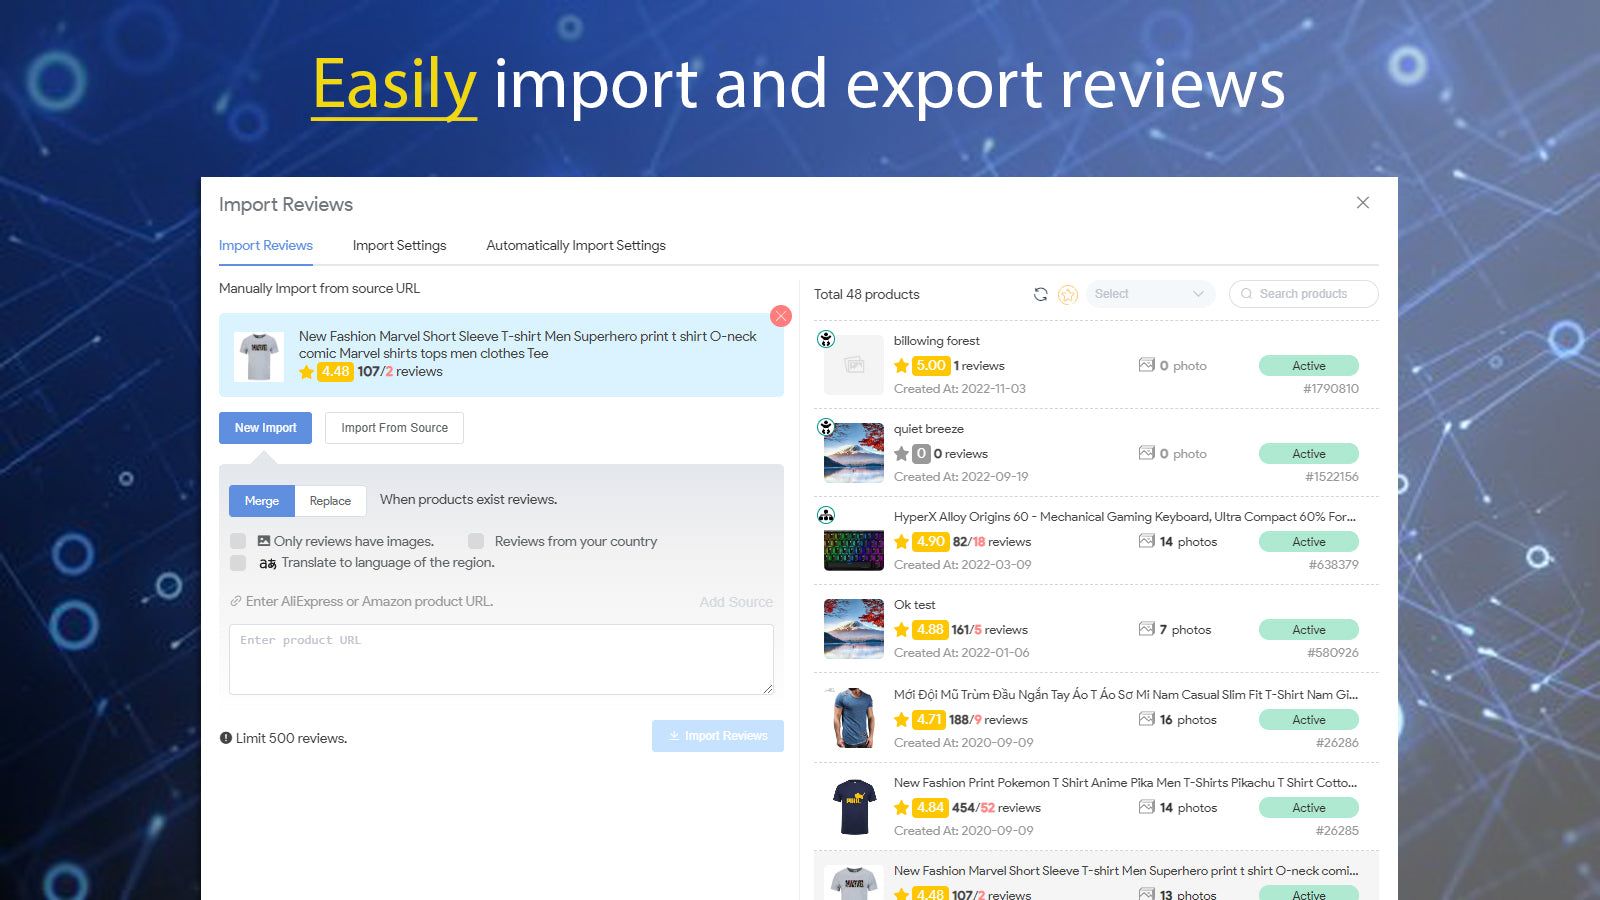 Easily import and export reviews